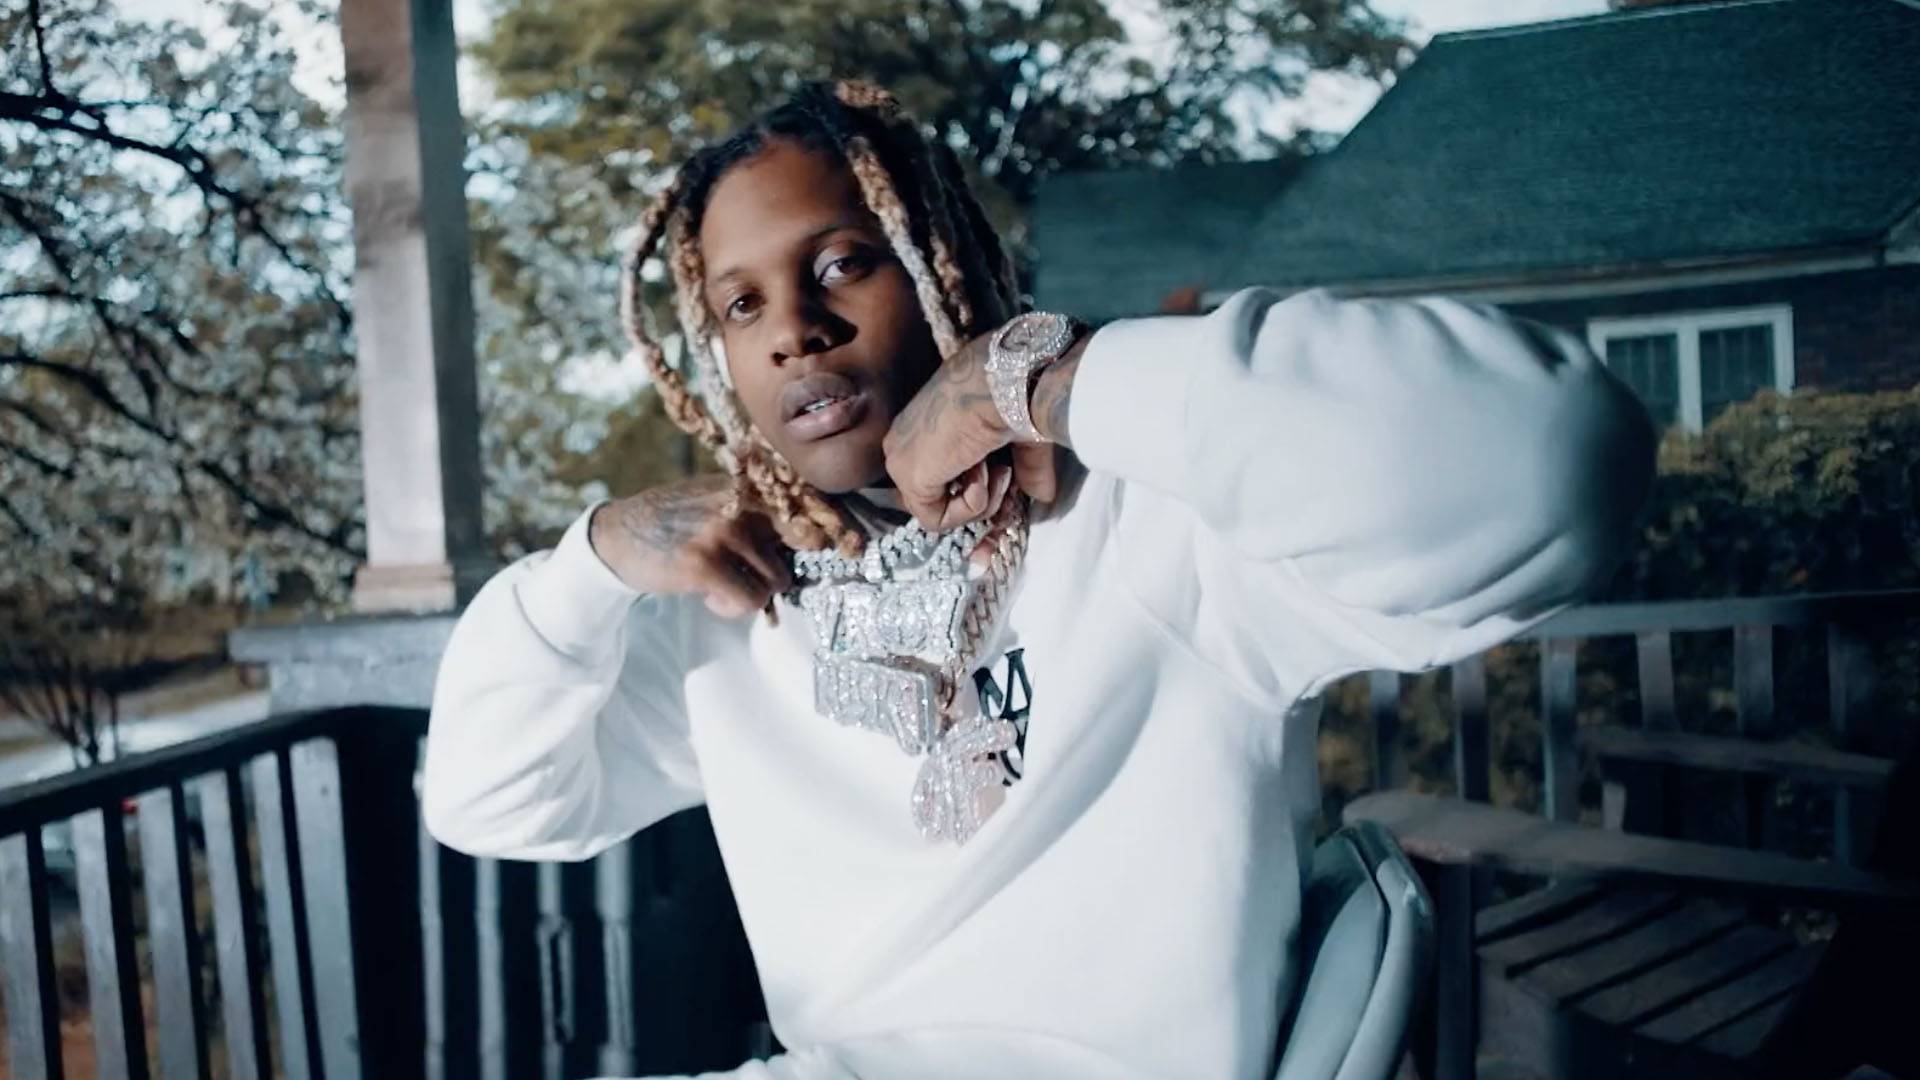 Lil Durk for the BET Awards 2021.